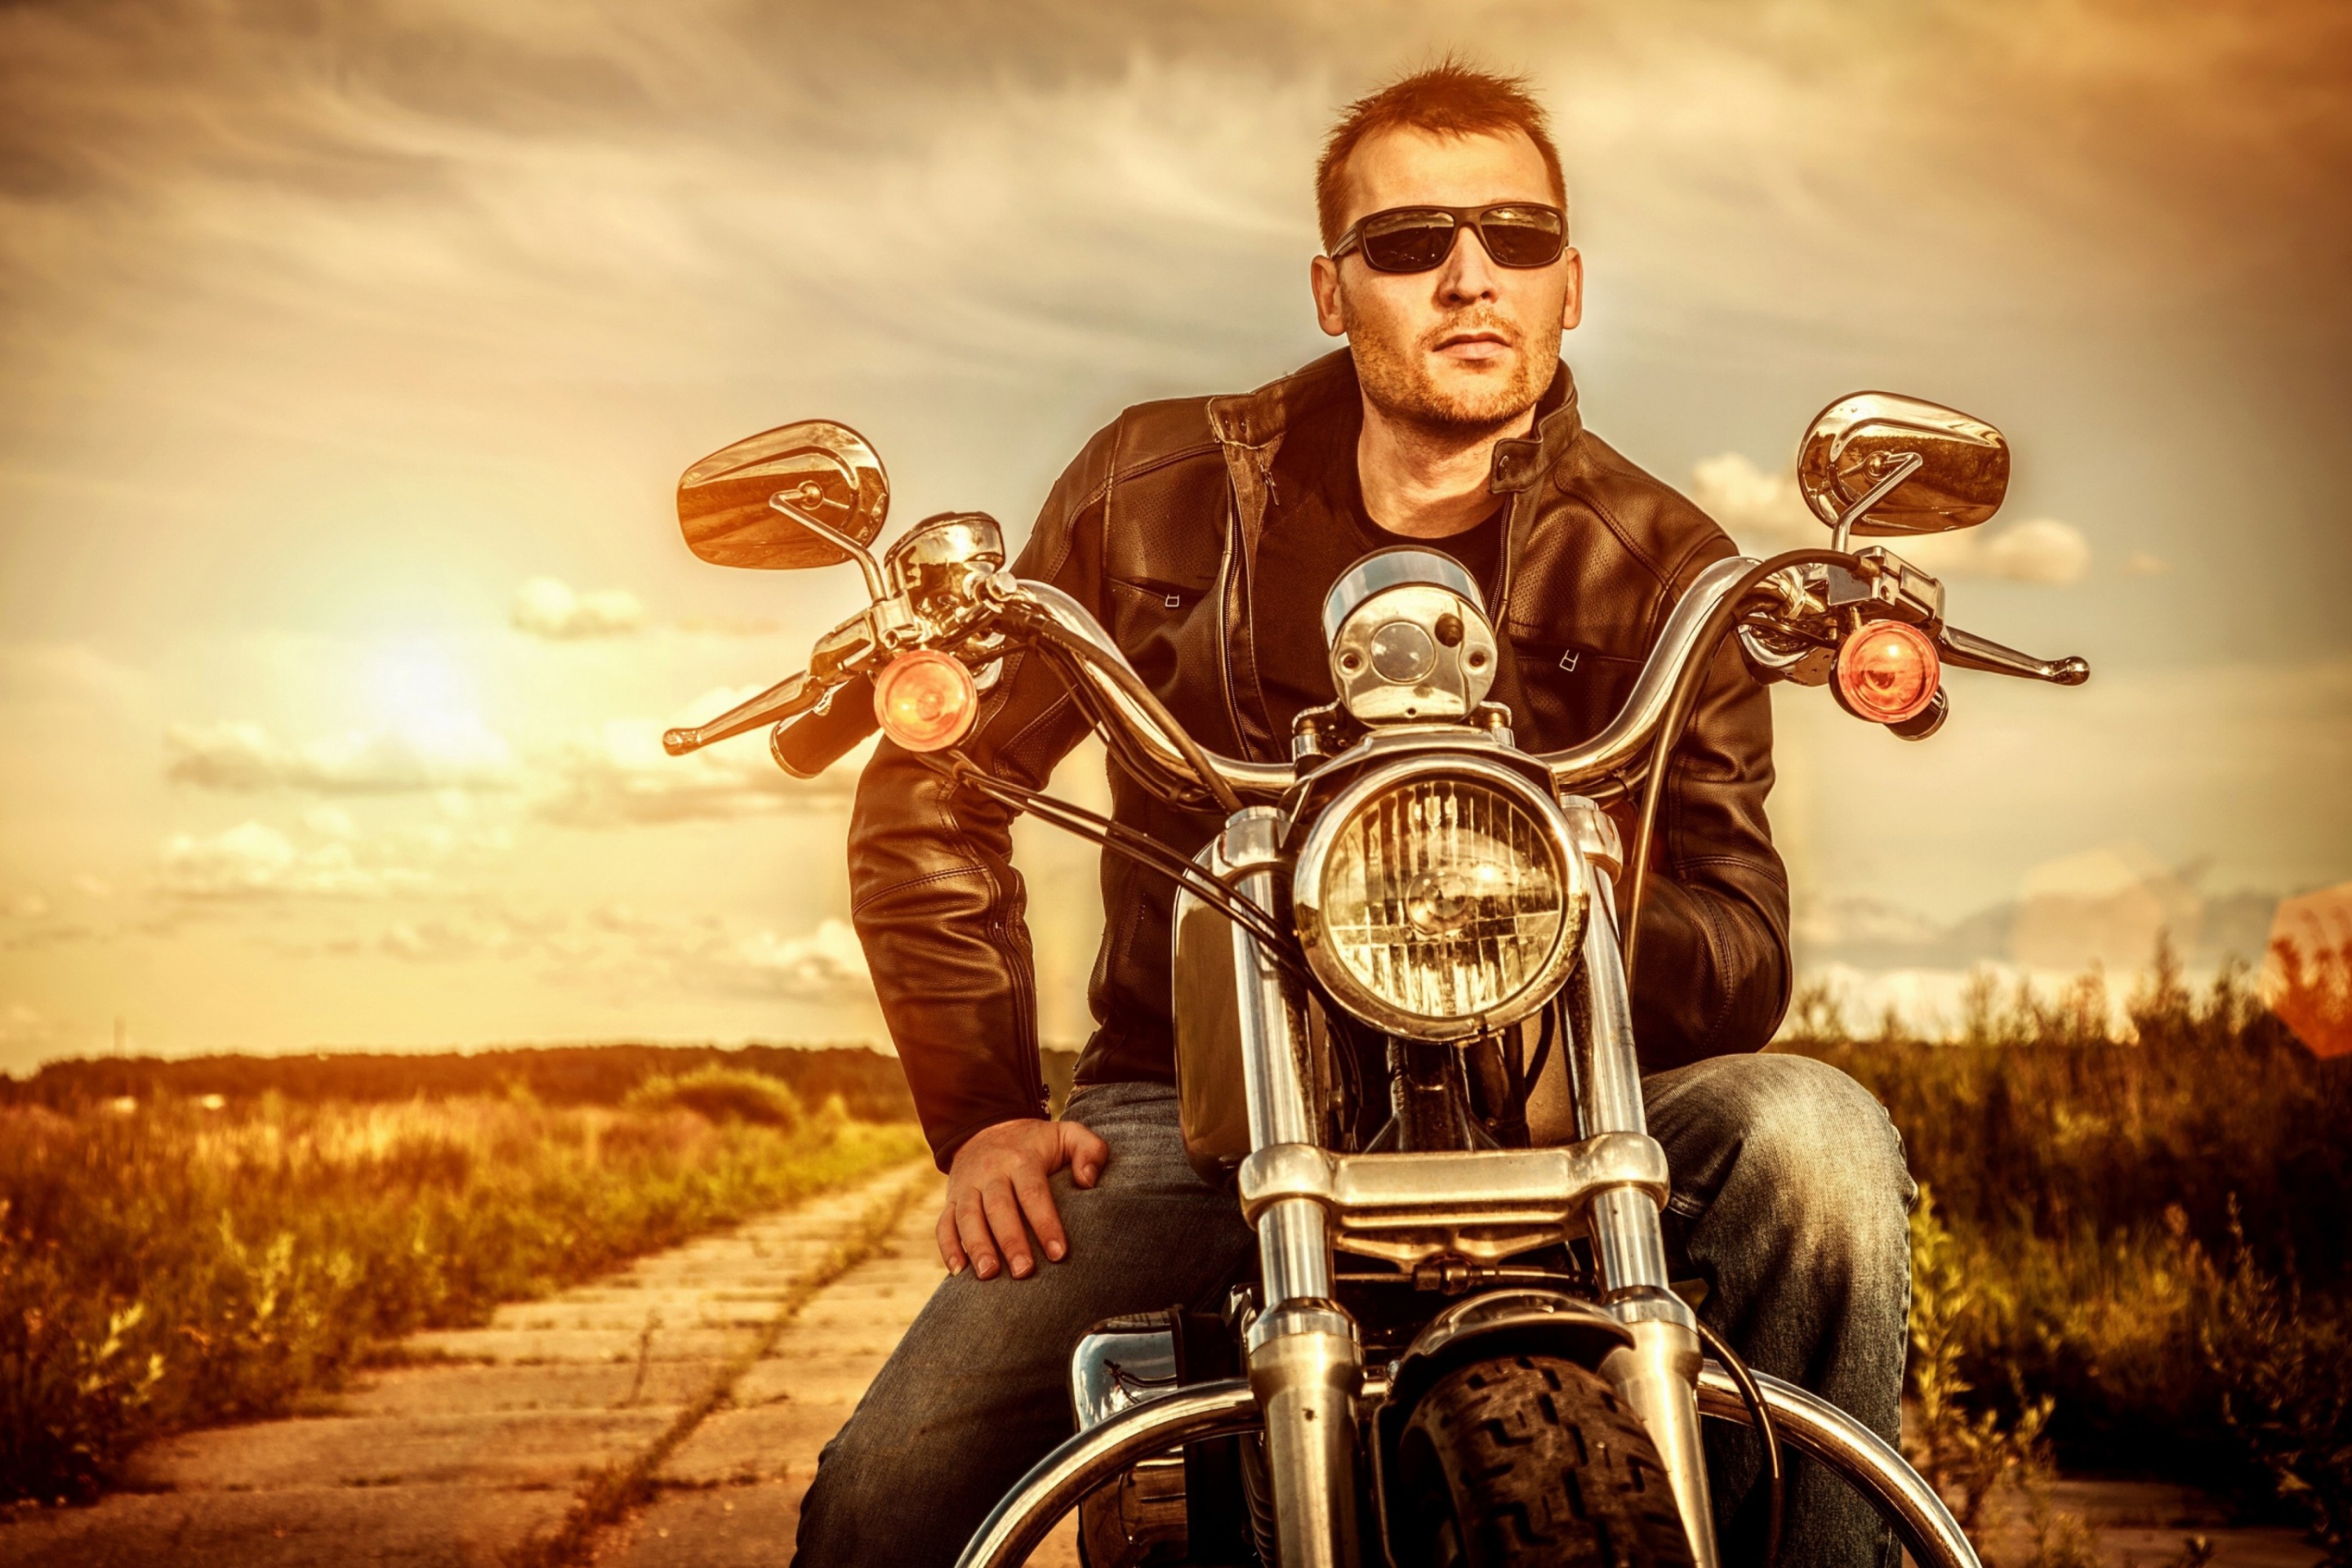 Motorcycle Driver wallpaper 2880x1920